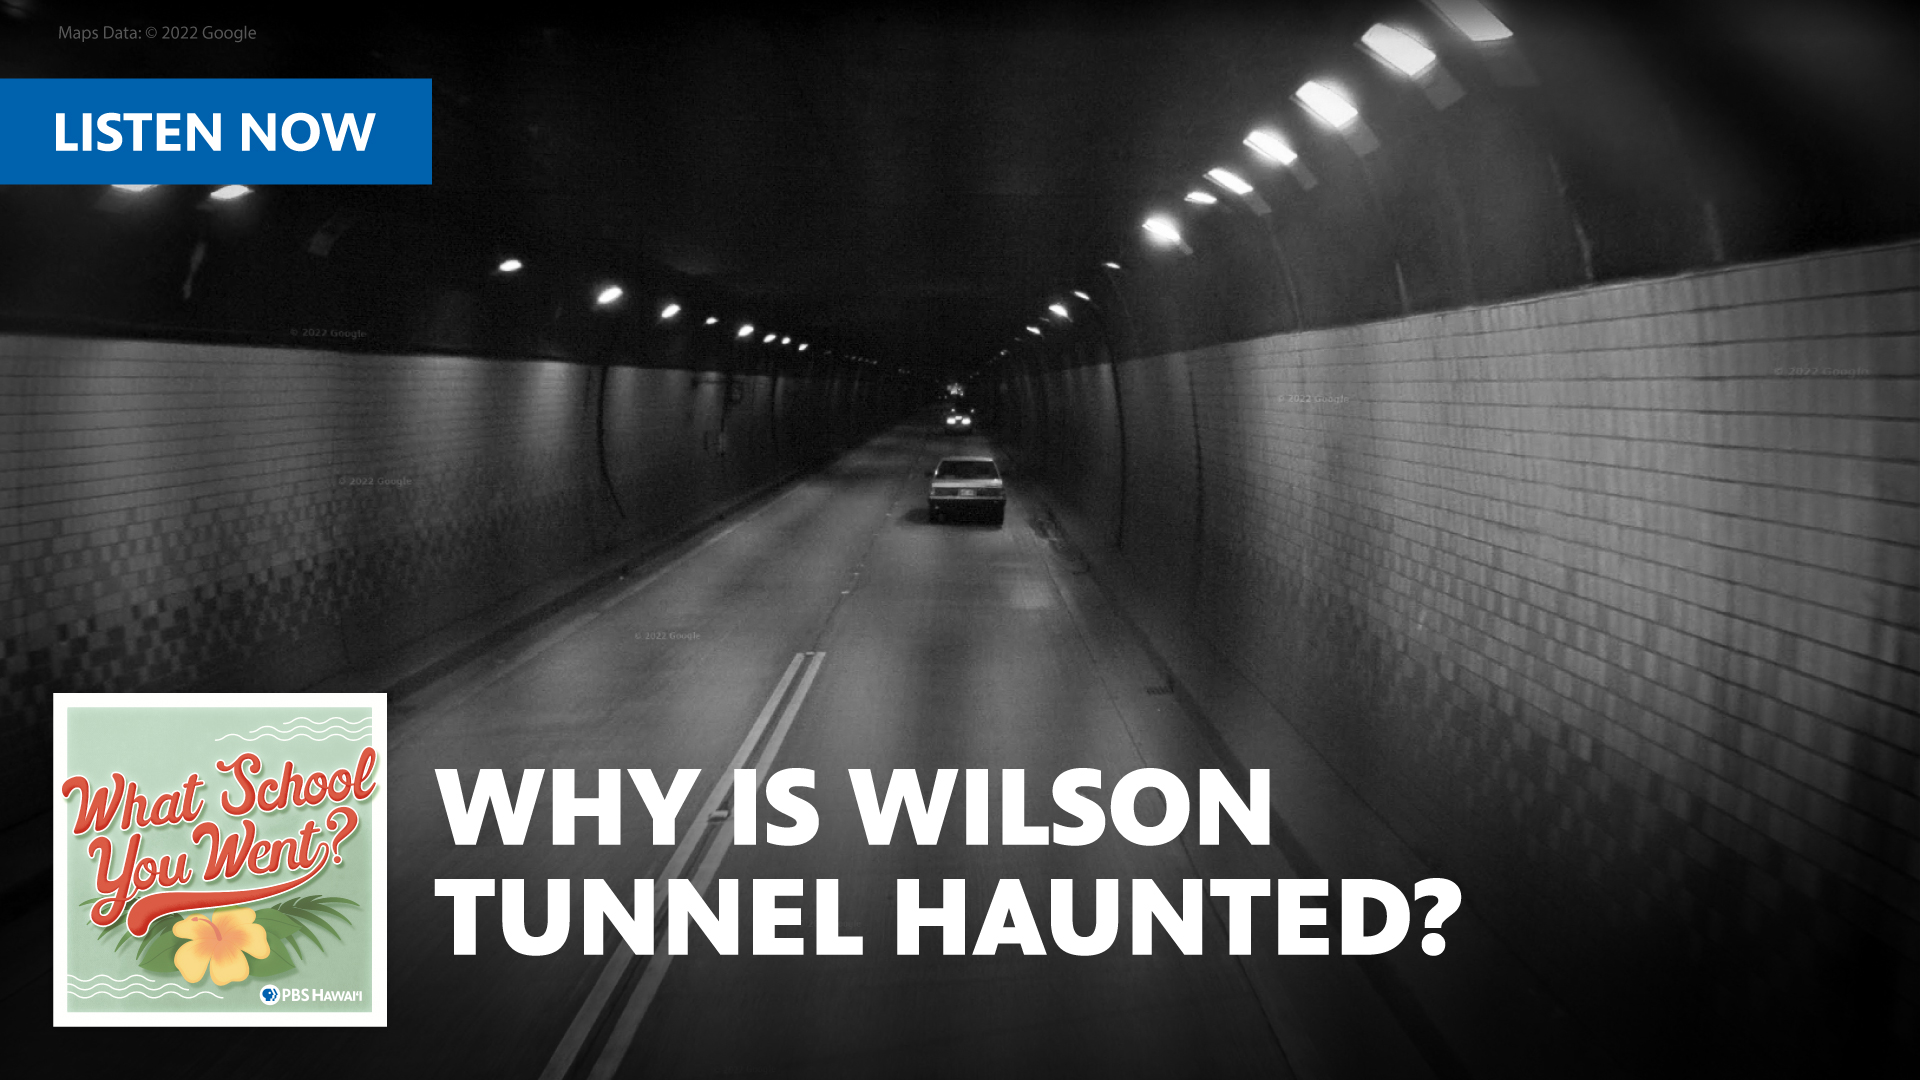 WHY IS WILSON TUNNEL HAUNTED?